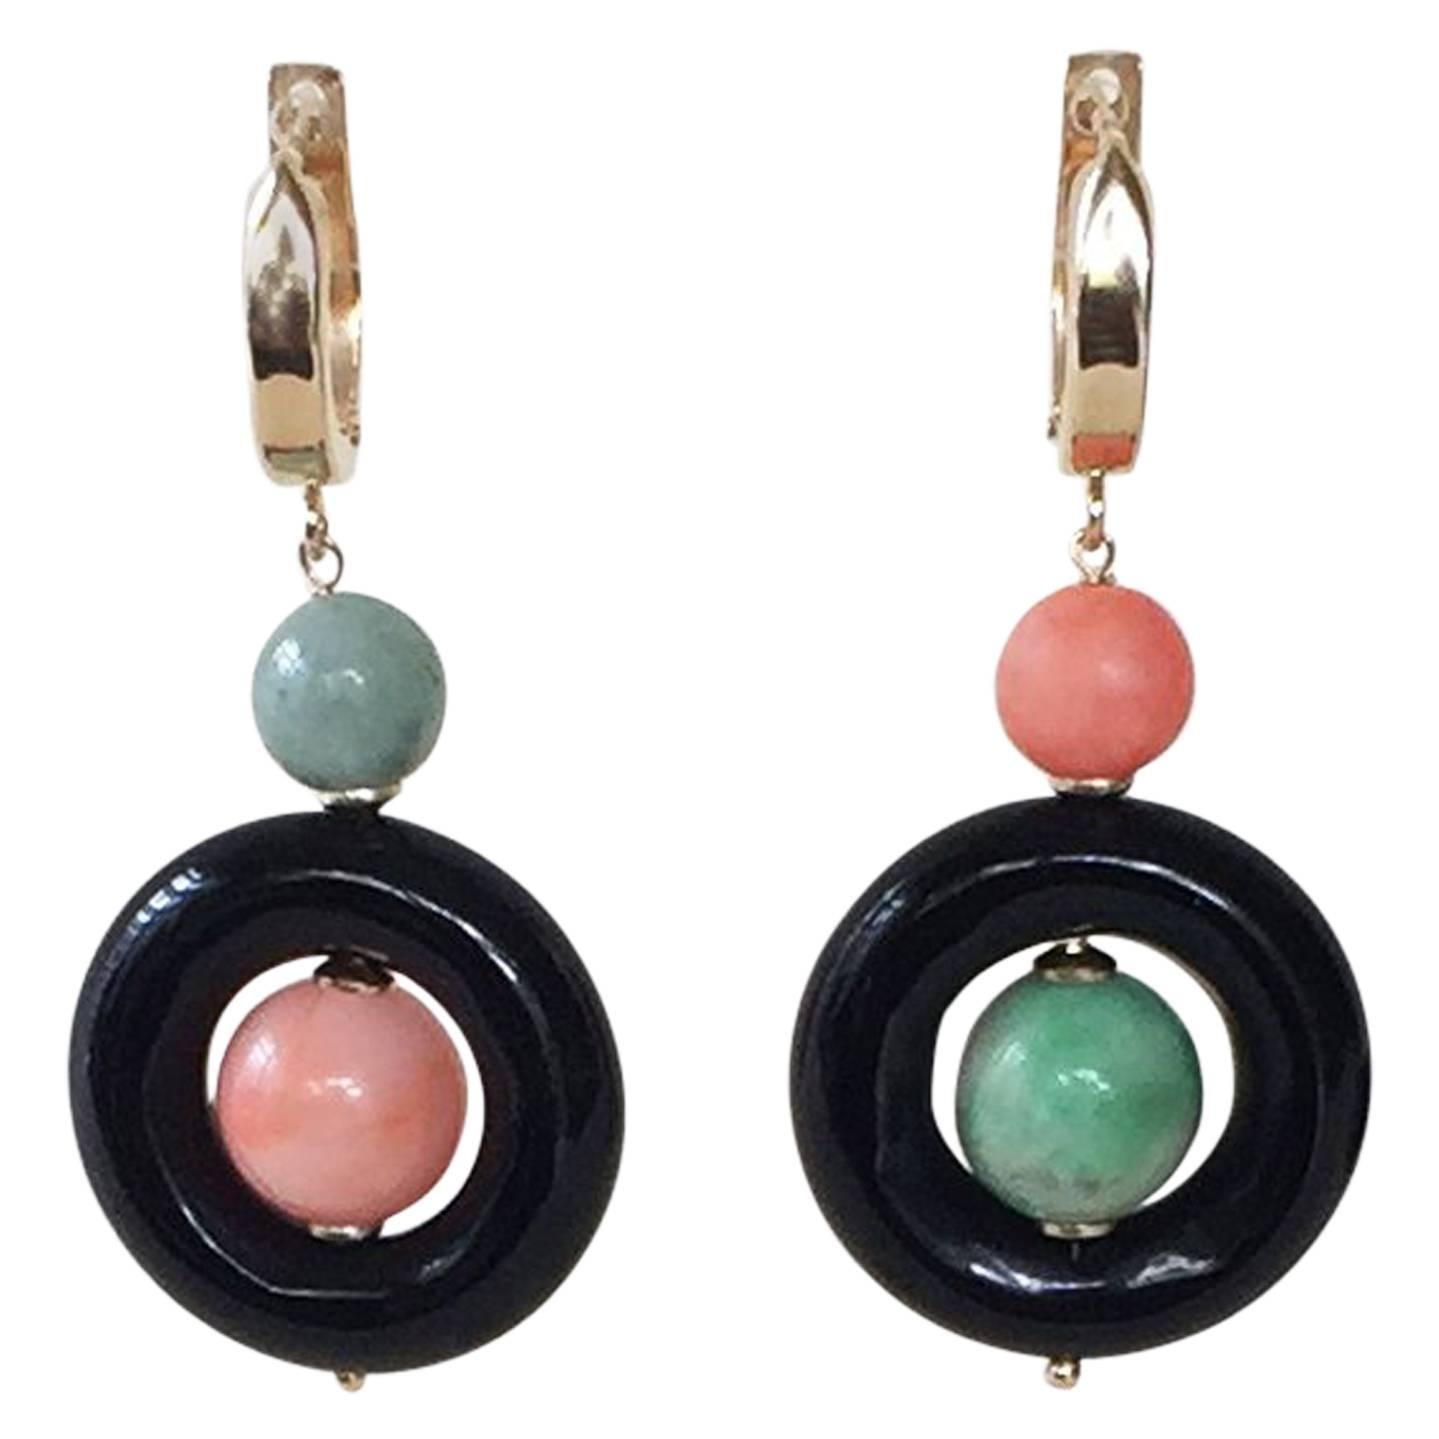 Onyx, Coral, and Jade Earrings with 14k Gold Wiring and Lever Backs by Marina J.